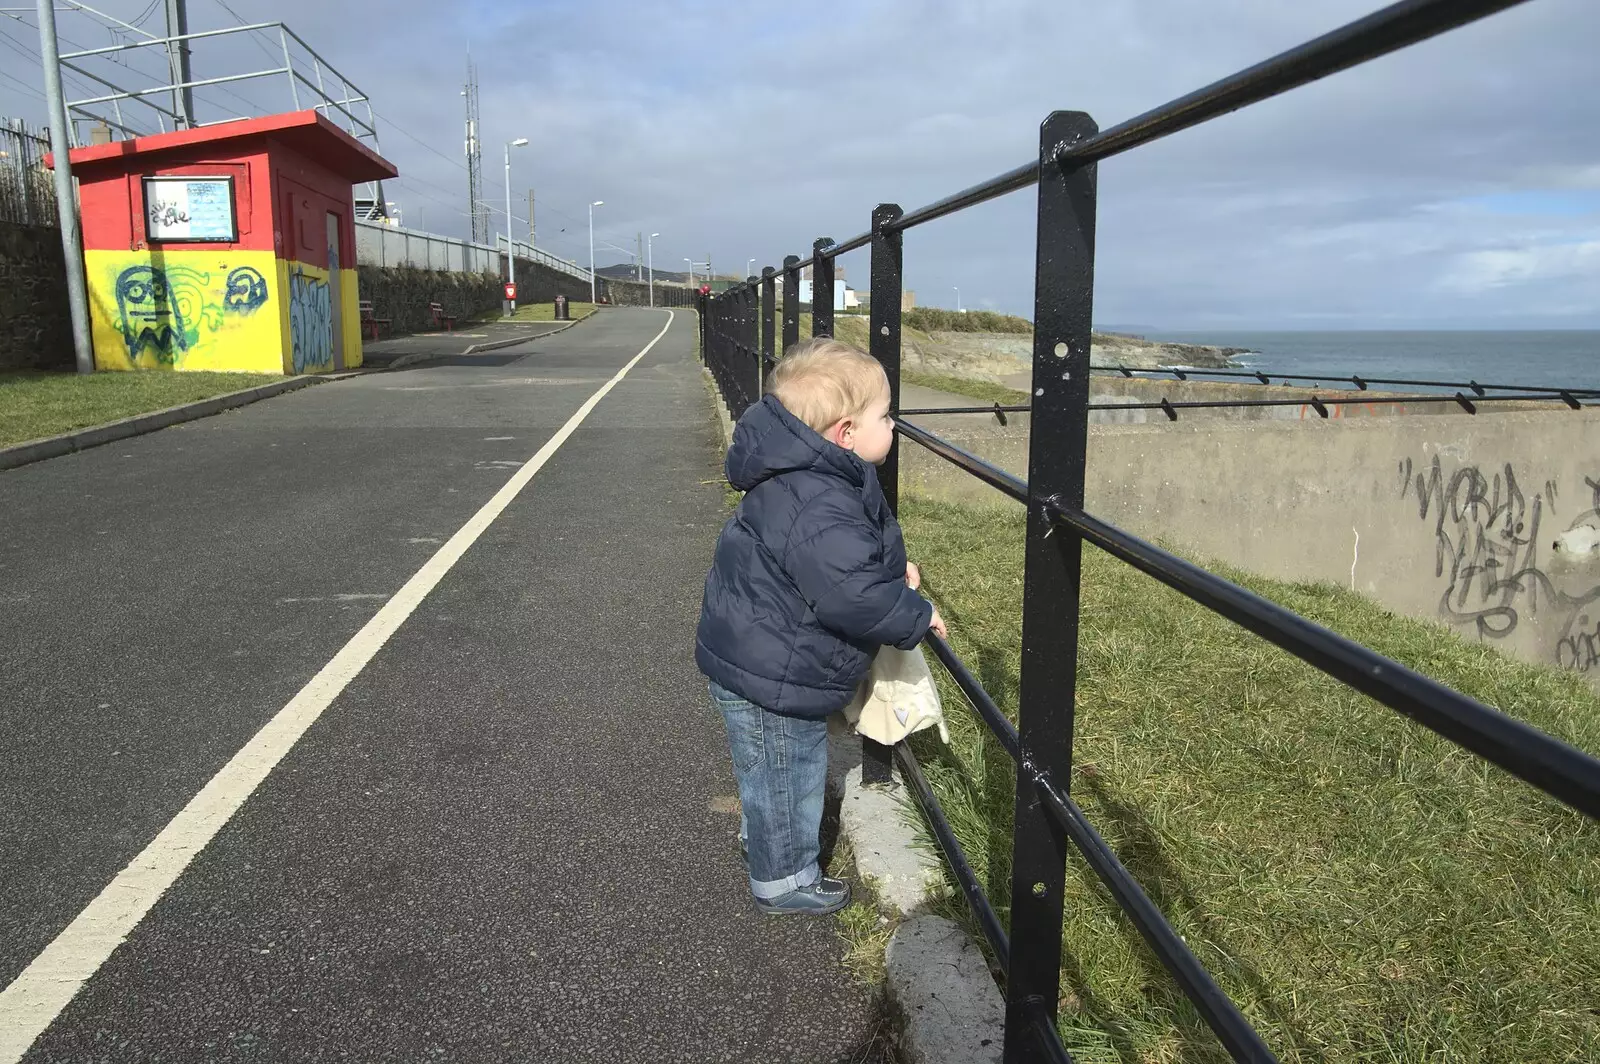 The Boy stares out to sea, from A Day in Greystones, County Dublin, Ireland - 28th February 2010